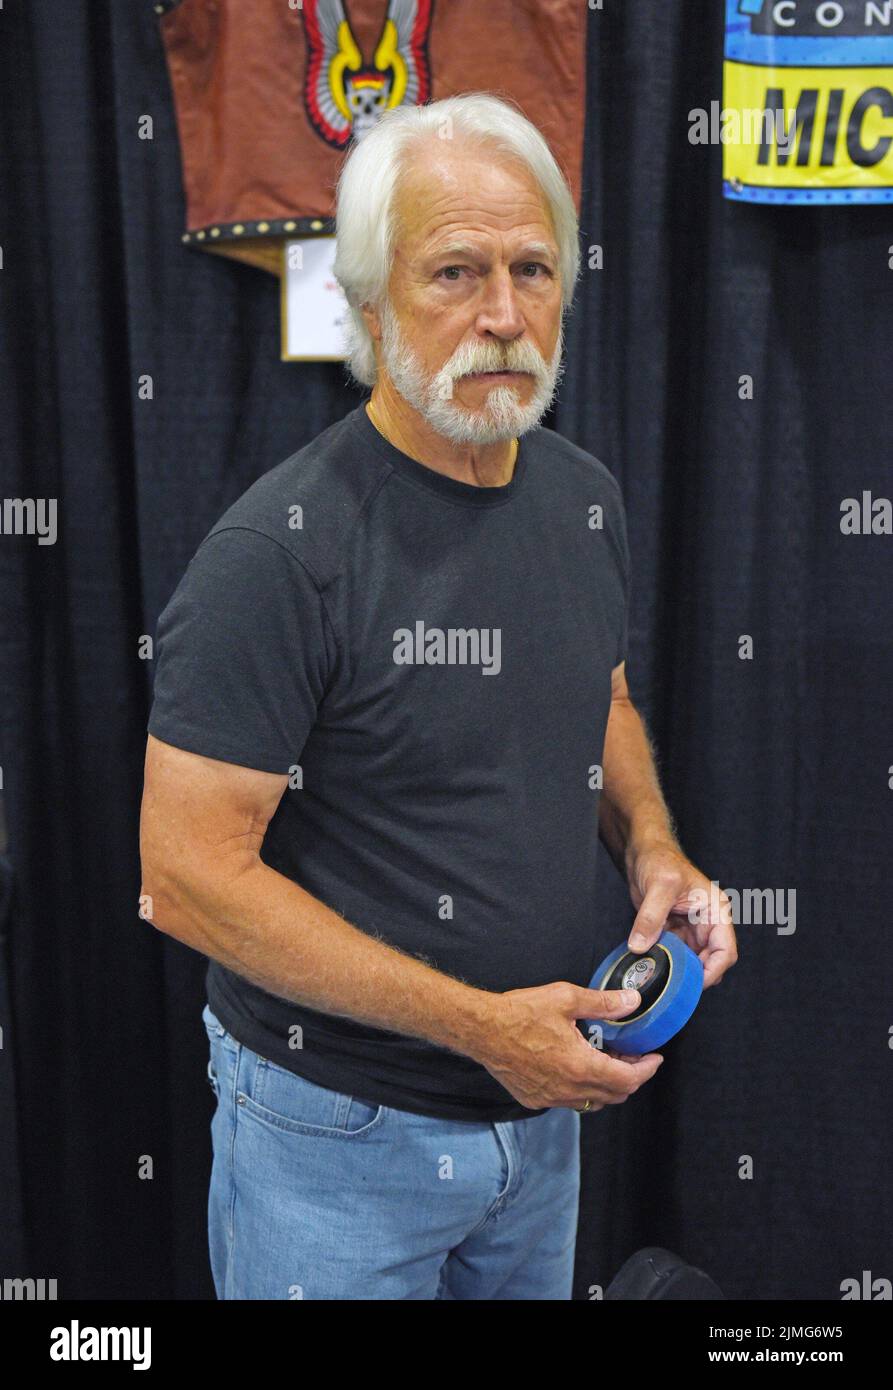 Knoxville, TN, USA. 5th Aug, 2022. Michael Beck in attendance for Fanboy Expo 2022, Knoxville Convention Center, Knoxville, TN August 5, 2022. Credit: Derek Storm/Everett Collection/Alamy Live News Stock Photo